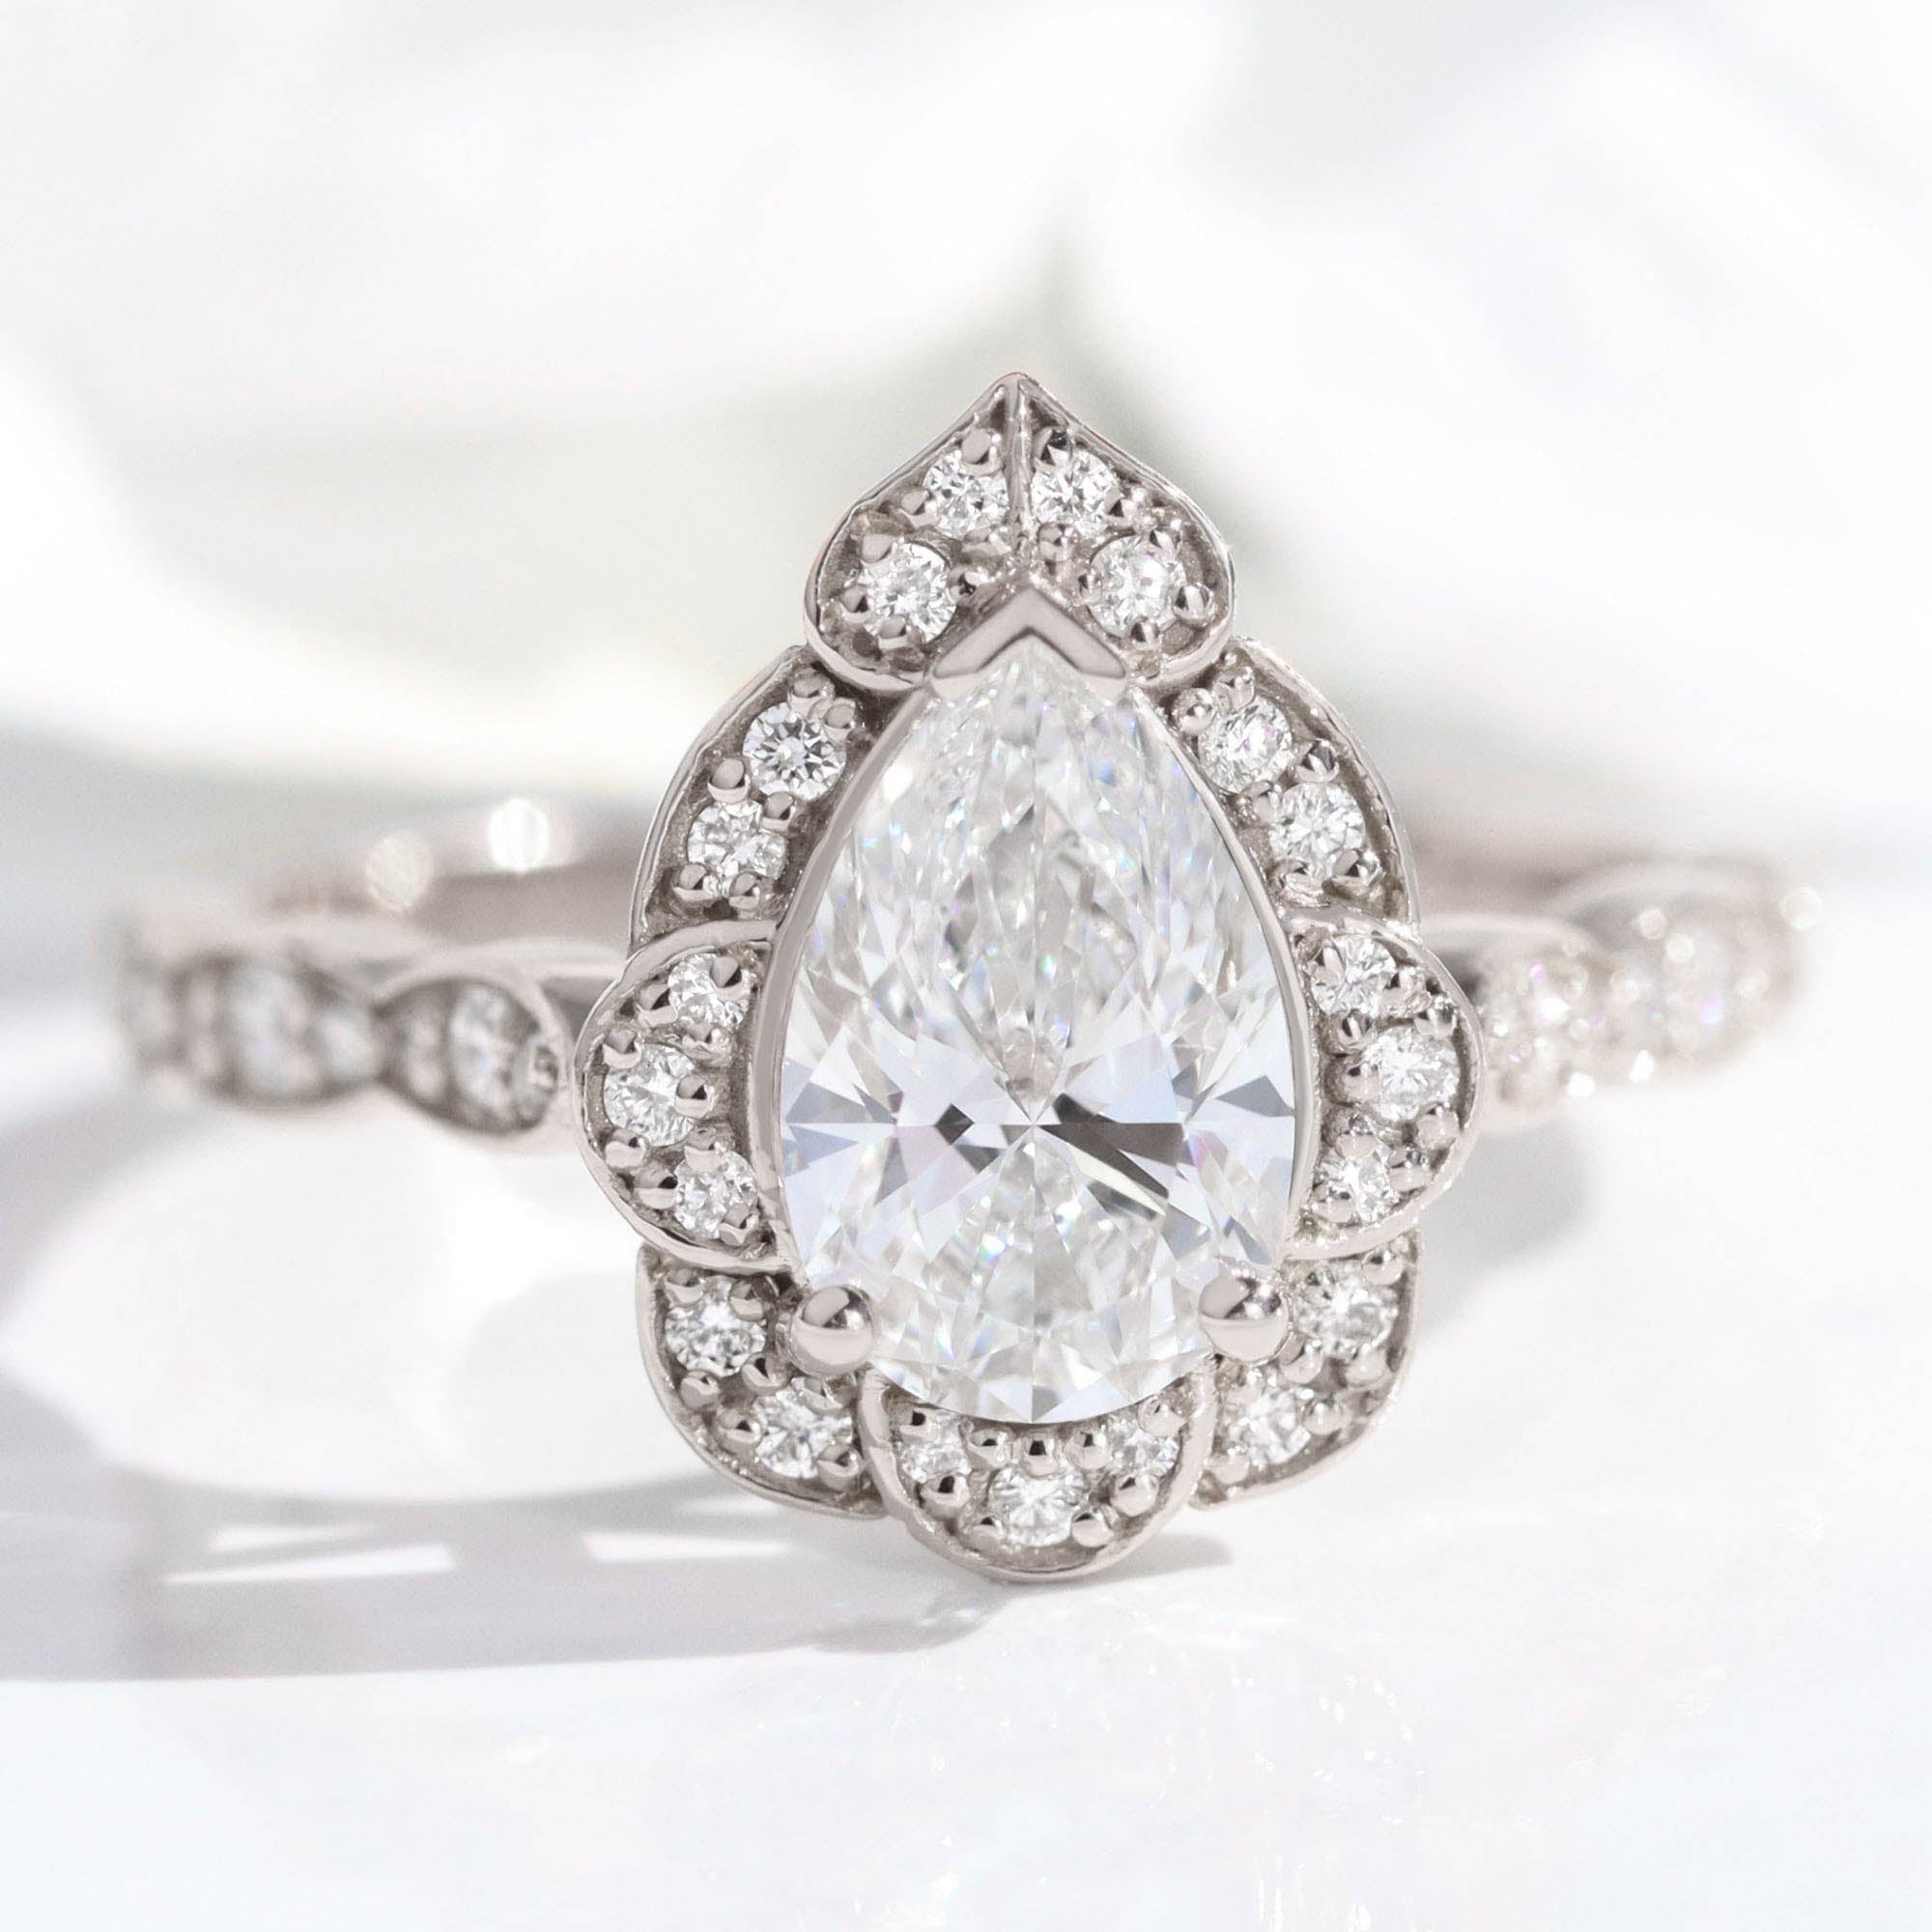 29 Stunning, Unique Engagement Rings You'll Fall in Love With